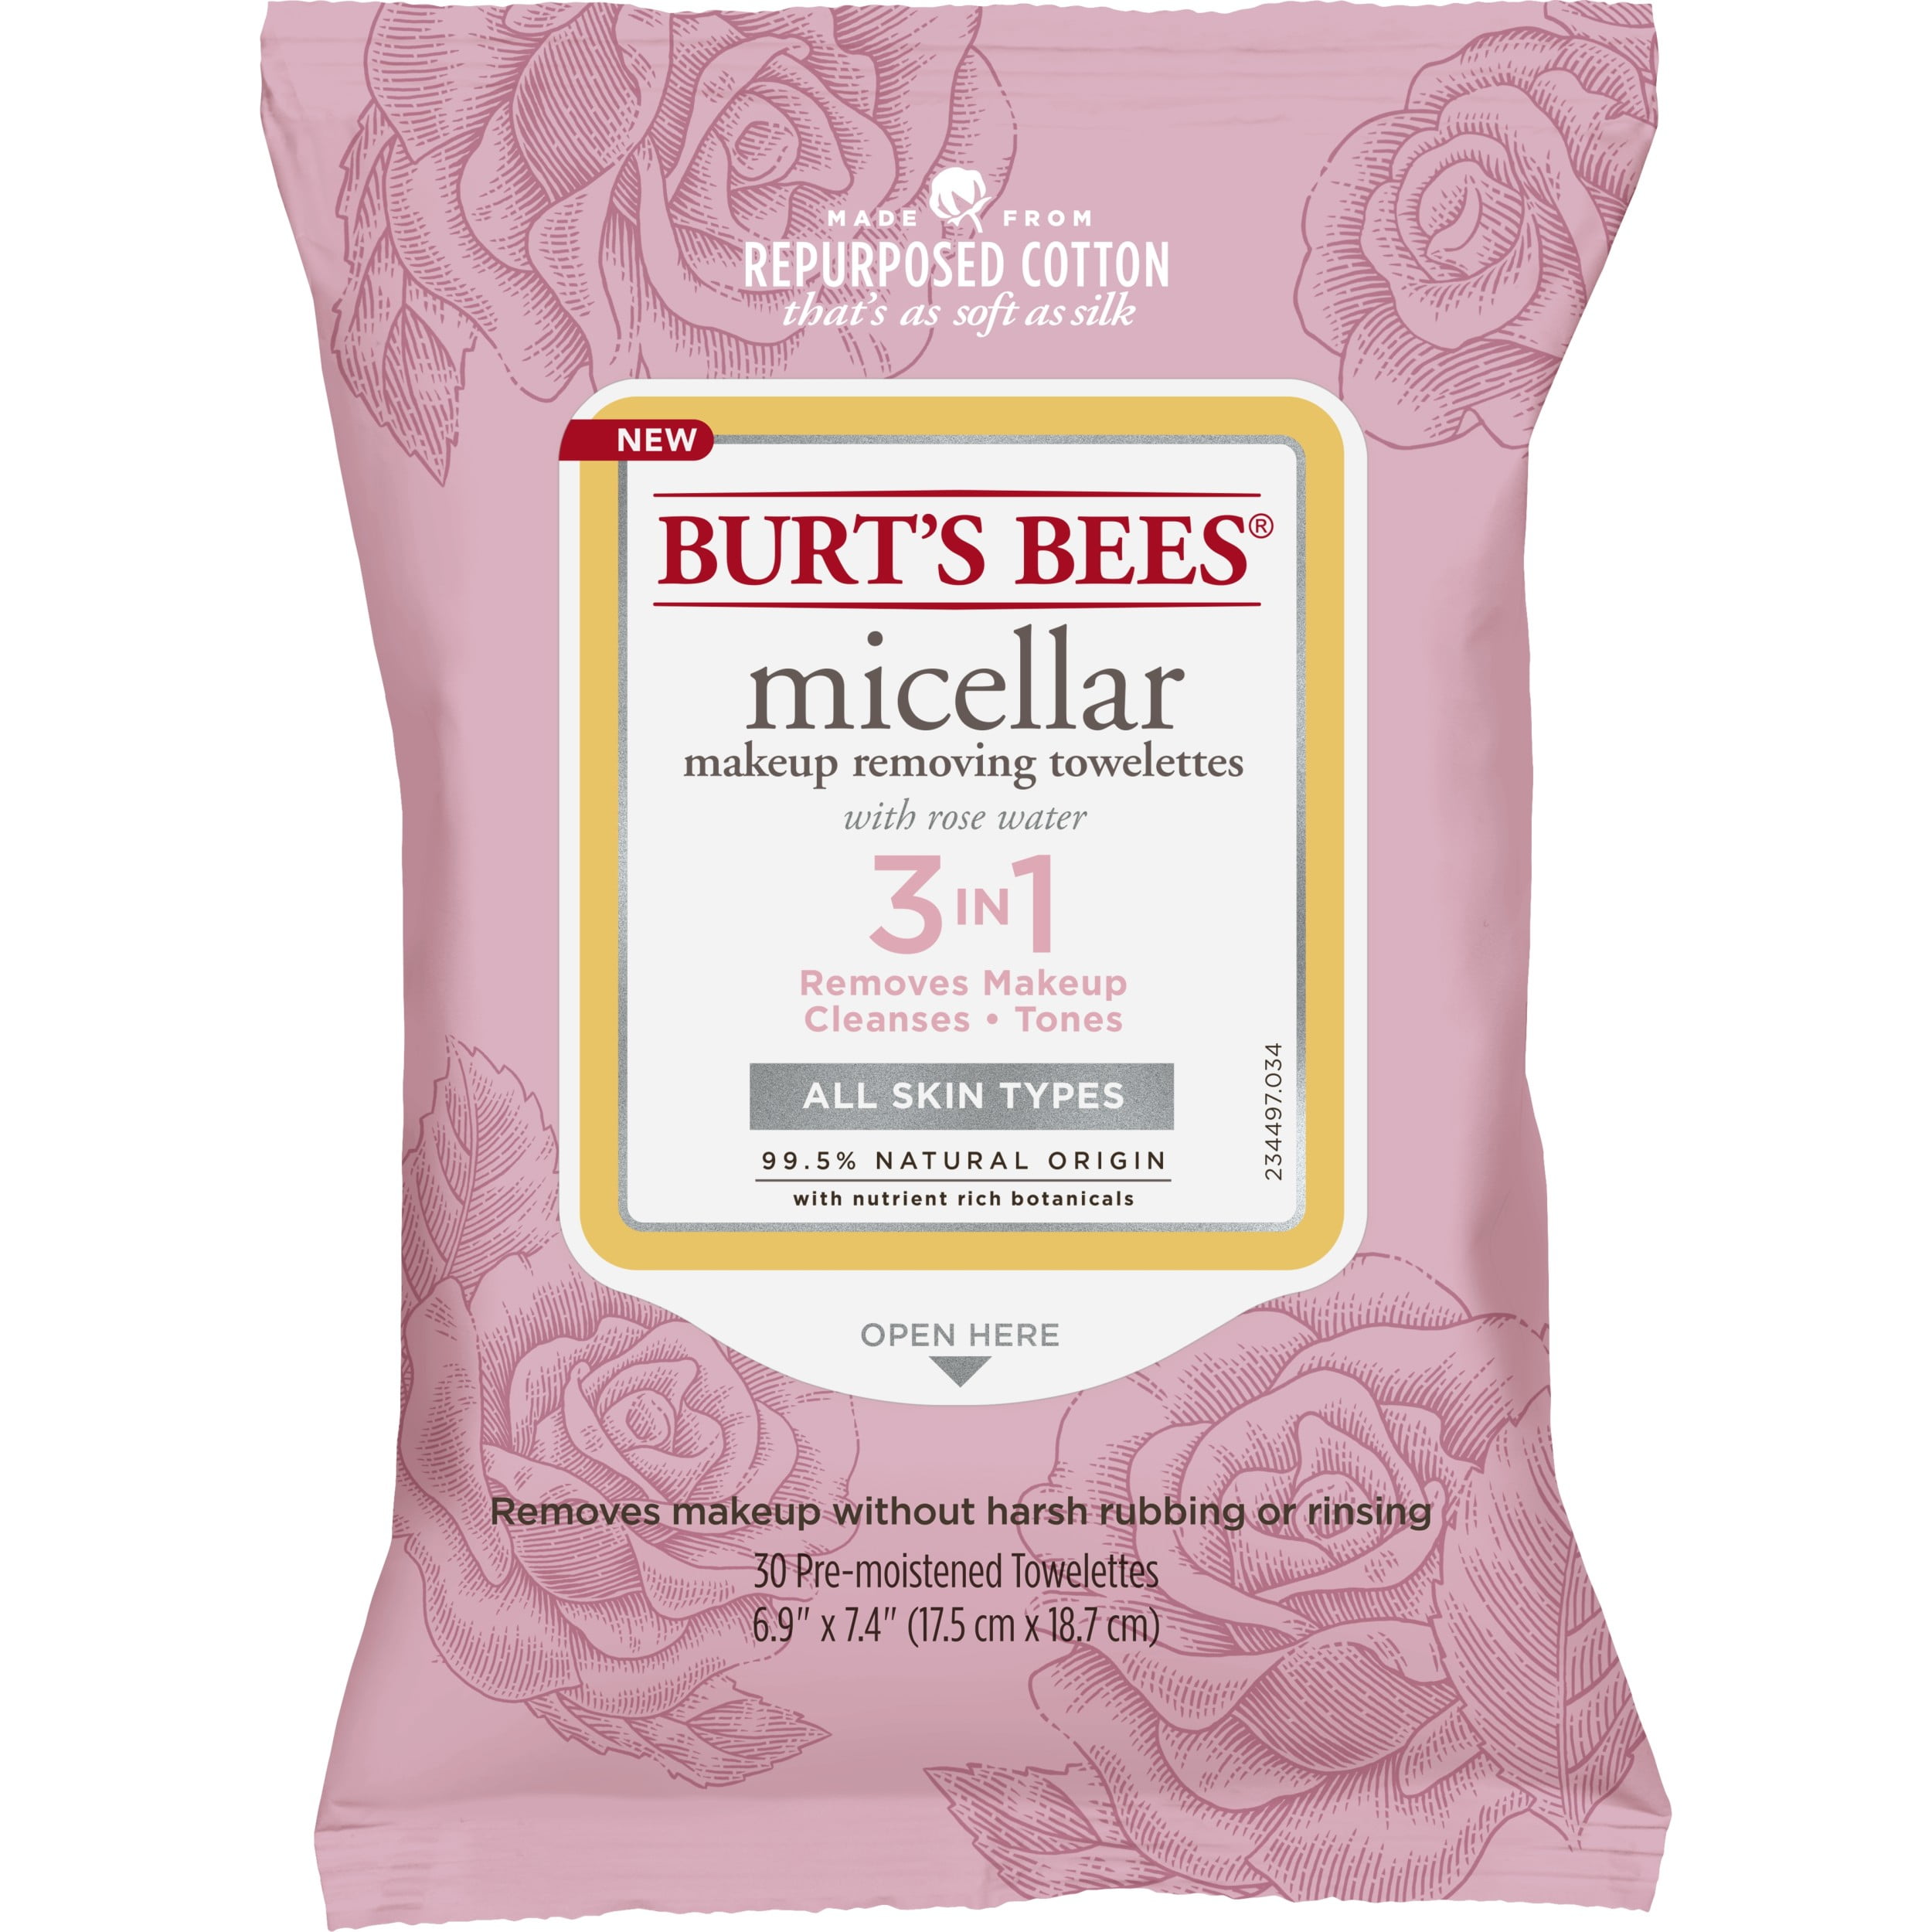 Burt's Bees 3 in 1 Micellar Makeup Removing Towelettes, 30 Towelettes